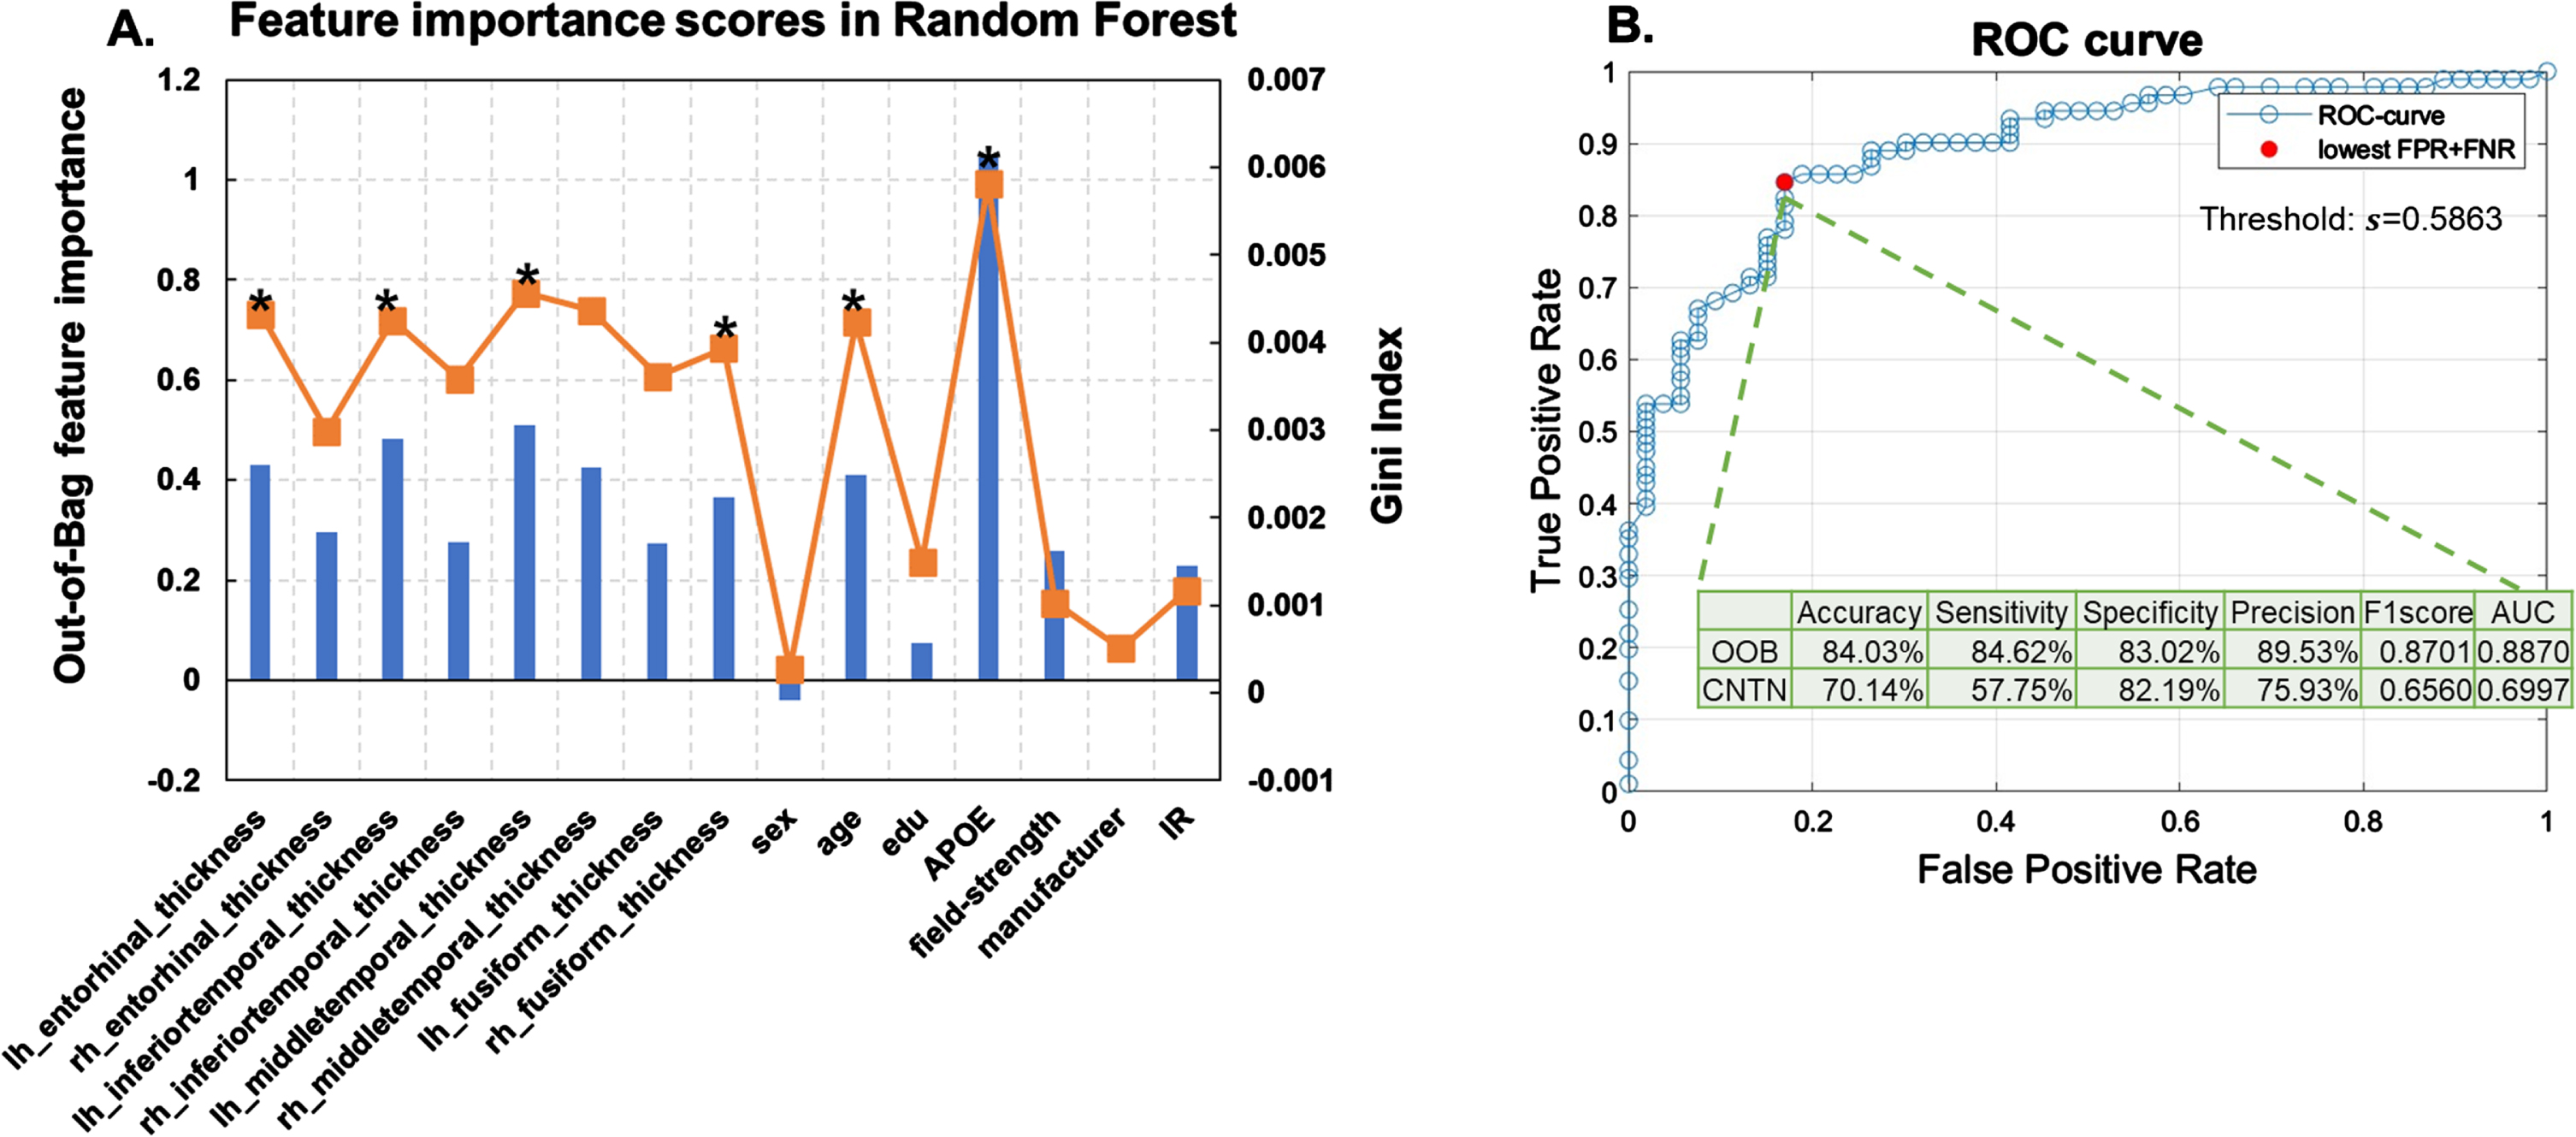 Random forest results. A) Feature selection results. Out-of-box (OOB) permutation based (blue bars) and Gini impurity index (orange curve) based feature importance scores in the random forest model trained using all features from NACC participants to classify the presence or absence of severe AD neuropathological status (ADNC3 versus ADNC0&1). Stars (*) indicate features retained in the final model. B) Model performance with selected features. ROC curve of the random forest model with the 6 selected features (detailed in Table 2). The red filled dot indicates the point with the lowest total false rate (false positive rate + false negative rate). The corresponding threshold s = 0.5863 is used to binarize the predicted probability in assigning participants to the ADNC3 group. Using this model with this threshold, the intersect table shows the OOB-validation-performance with NACC participants to classify AD neuropathological status (ADNC3 versus ADNC0&1) and external testing results with CNTN participants to classify amyloid positivity status (amyloid positive versus amyloid negative).